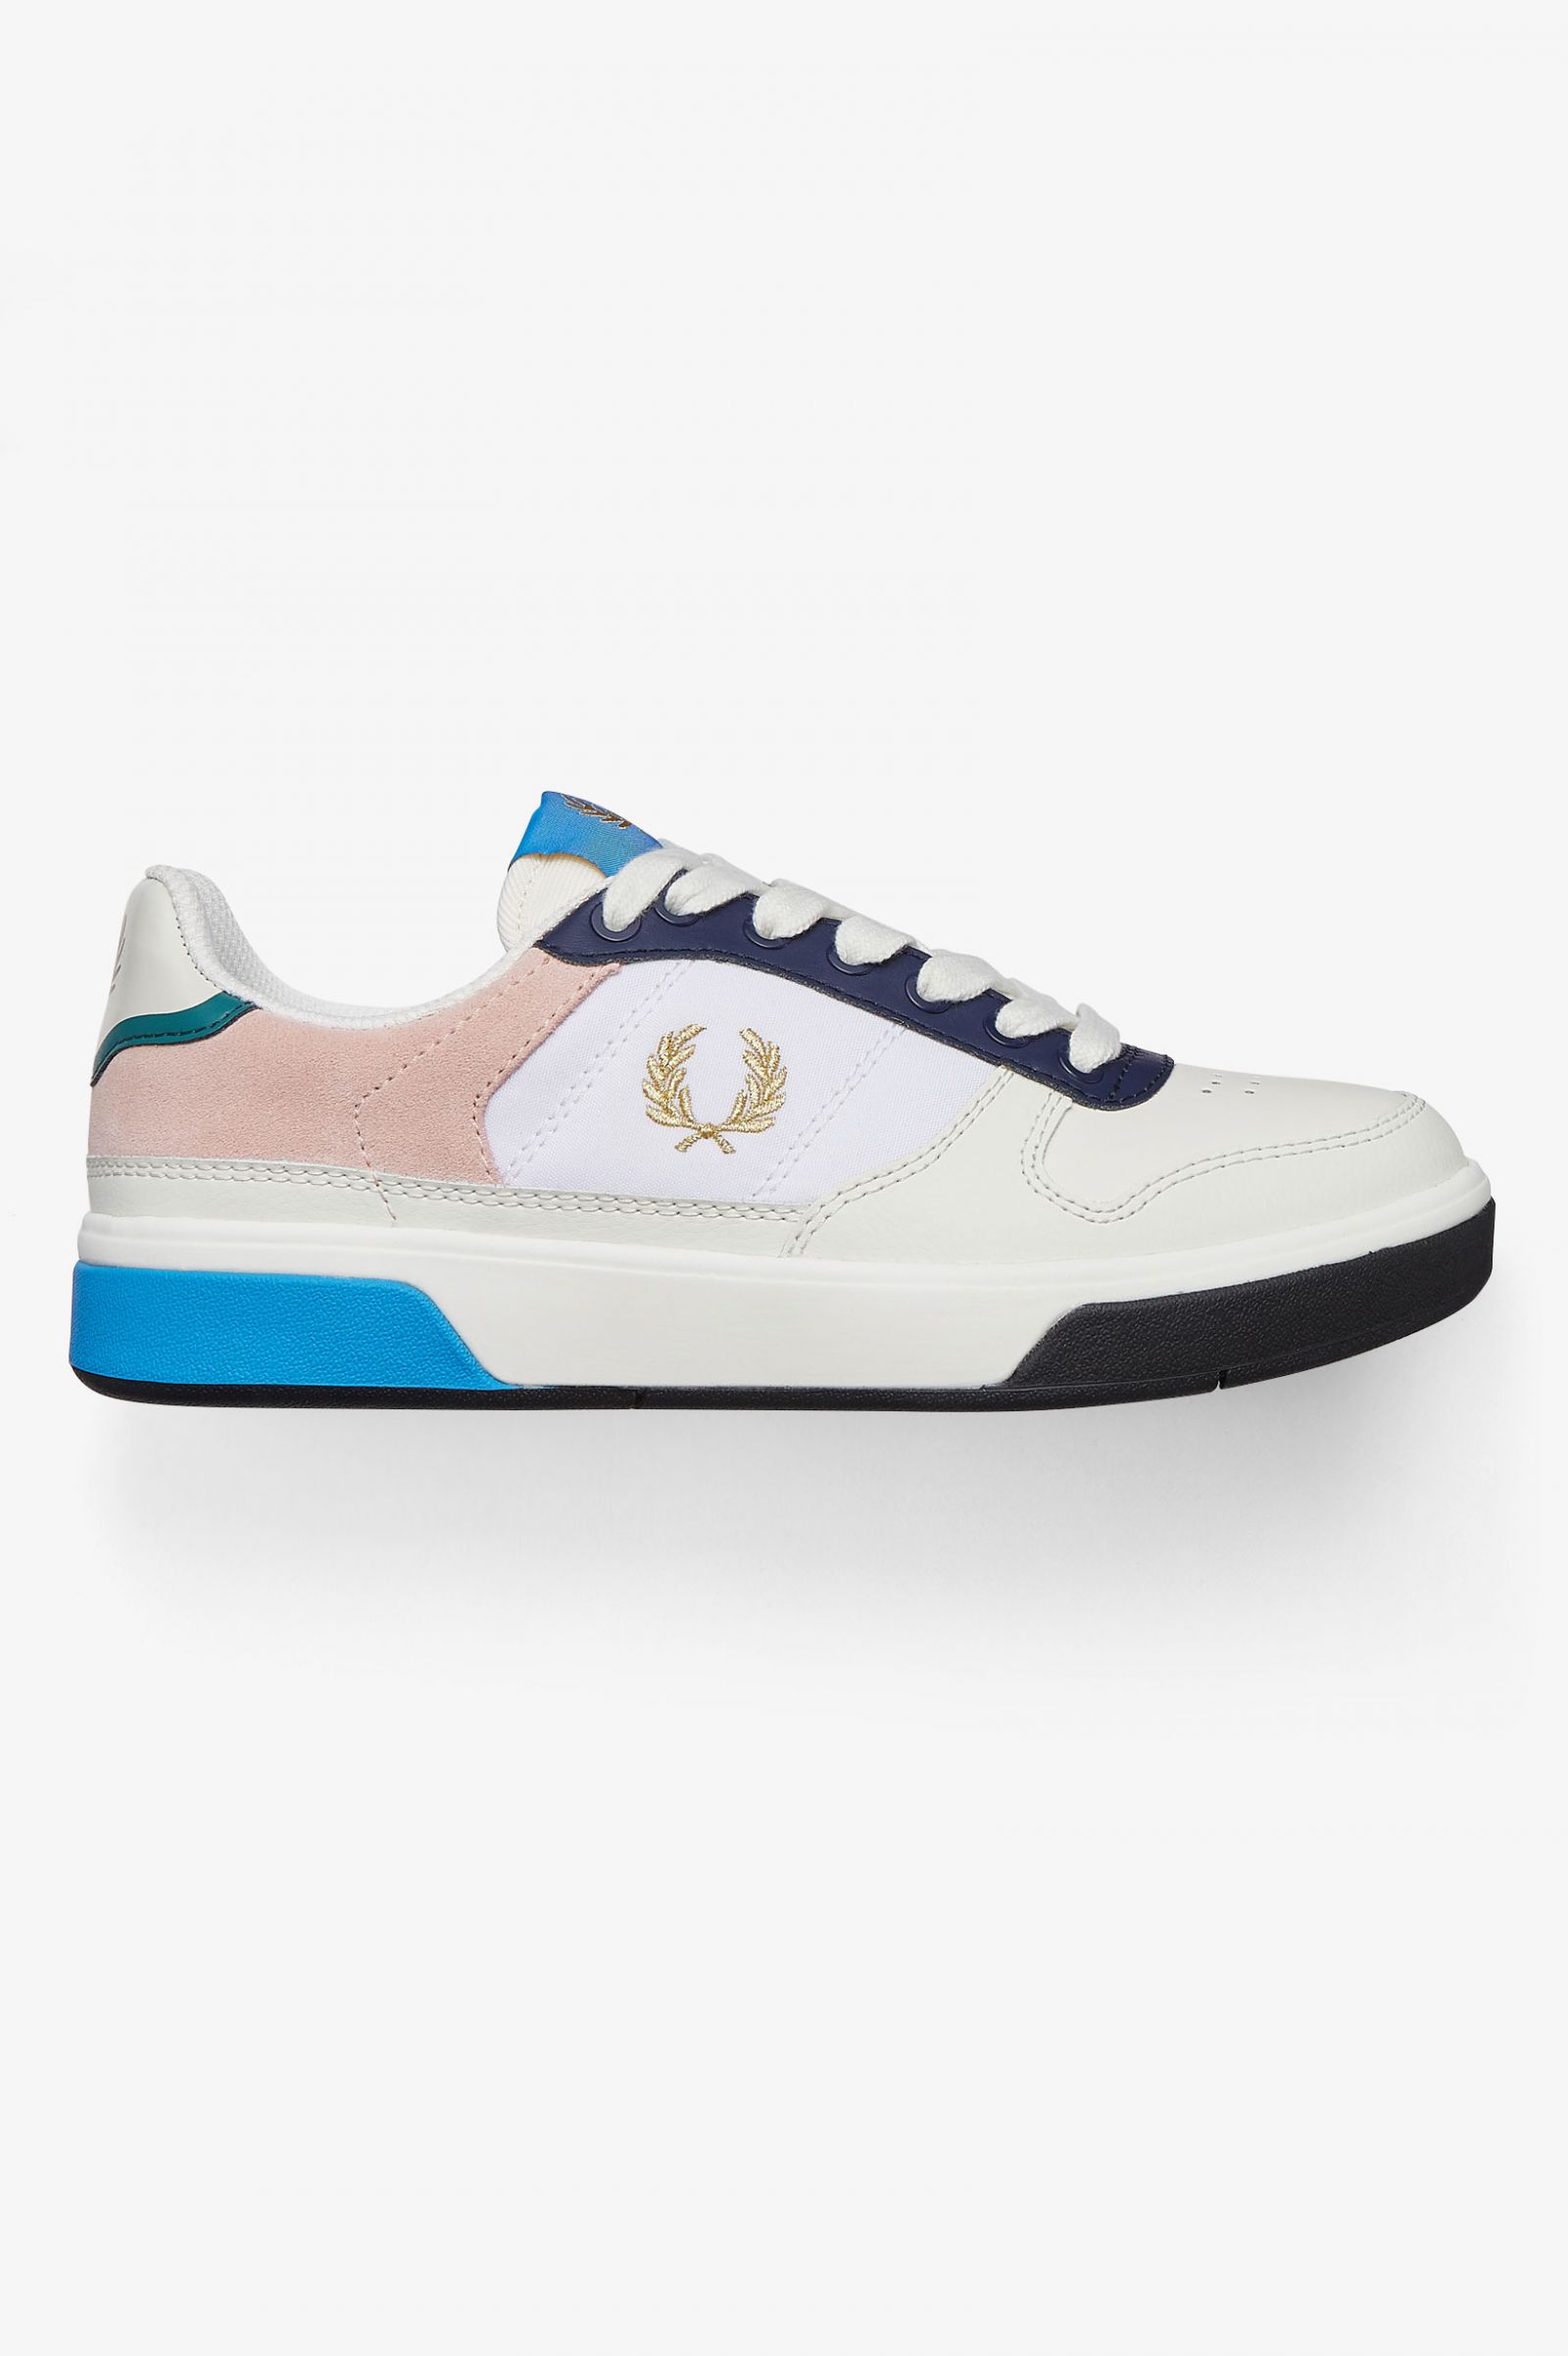 fred perry tennis shoes